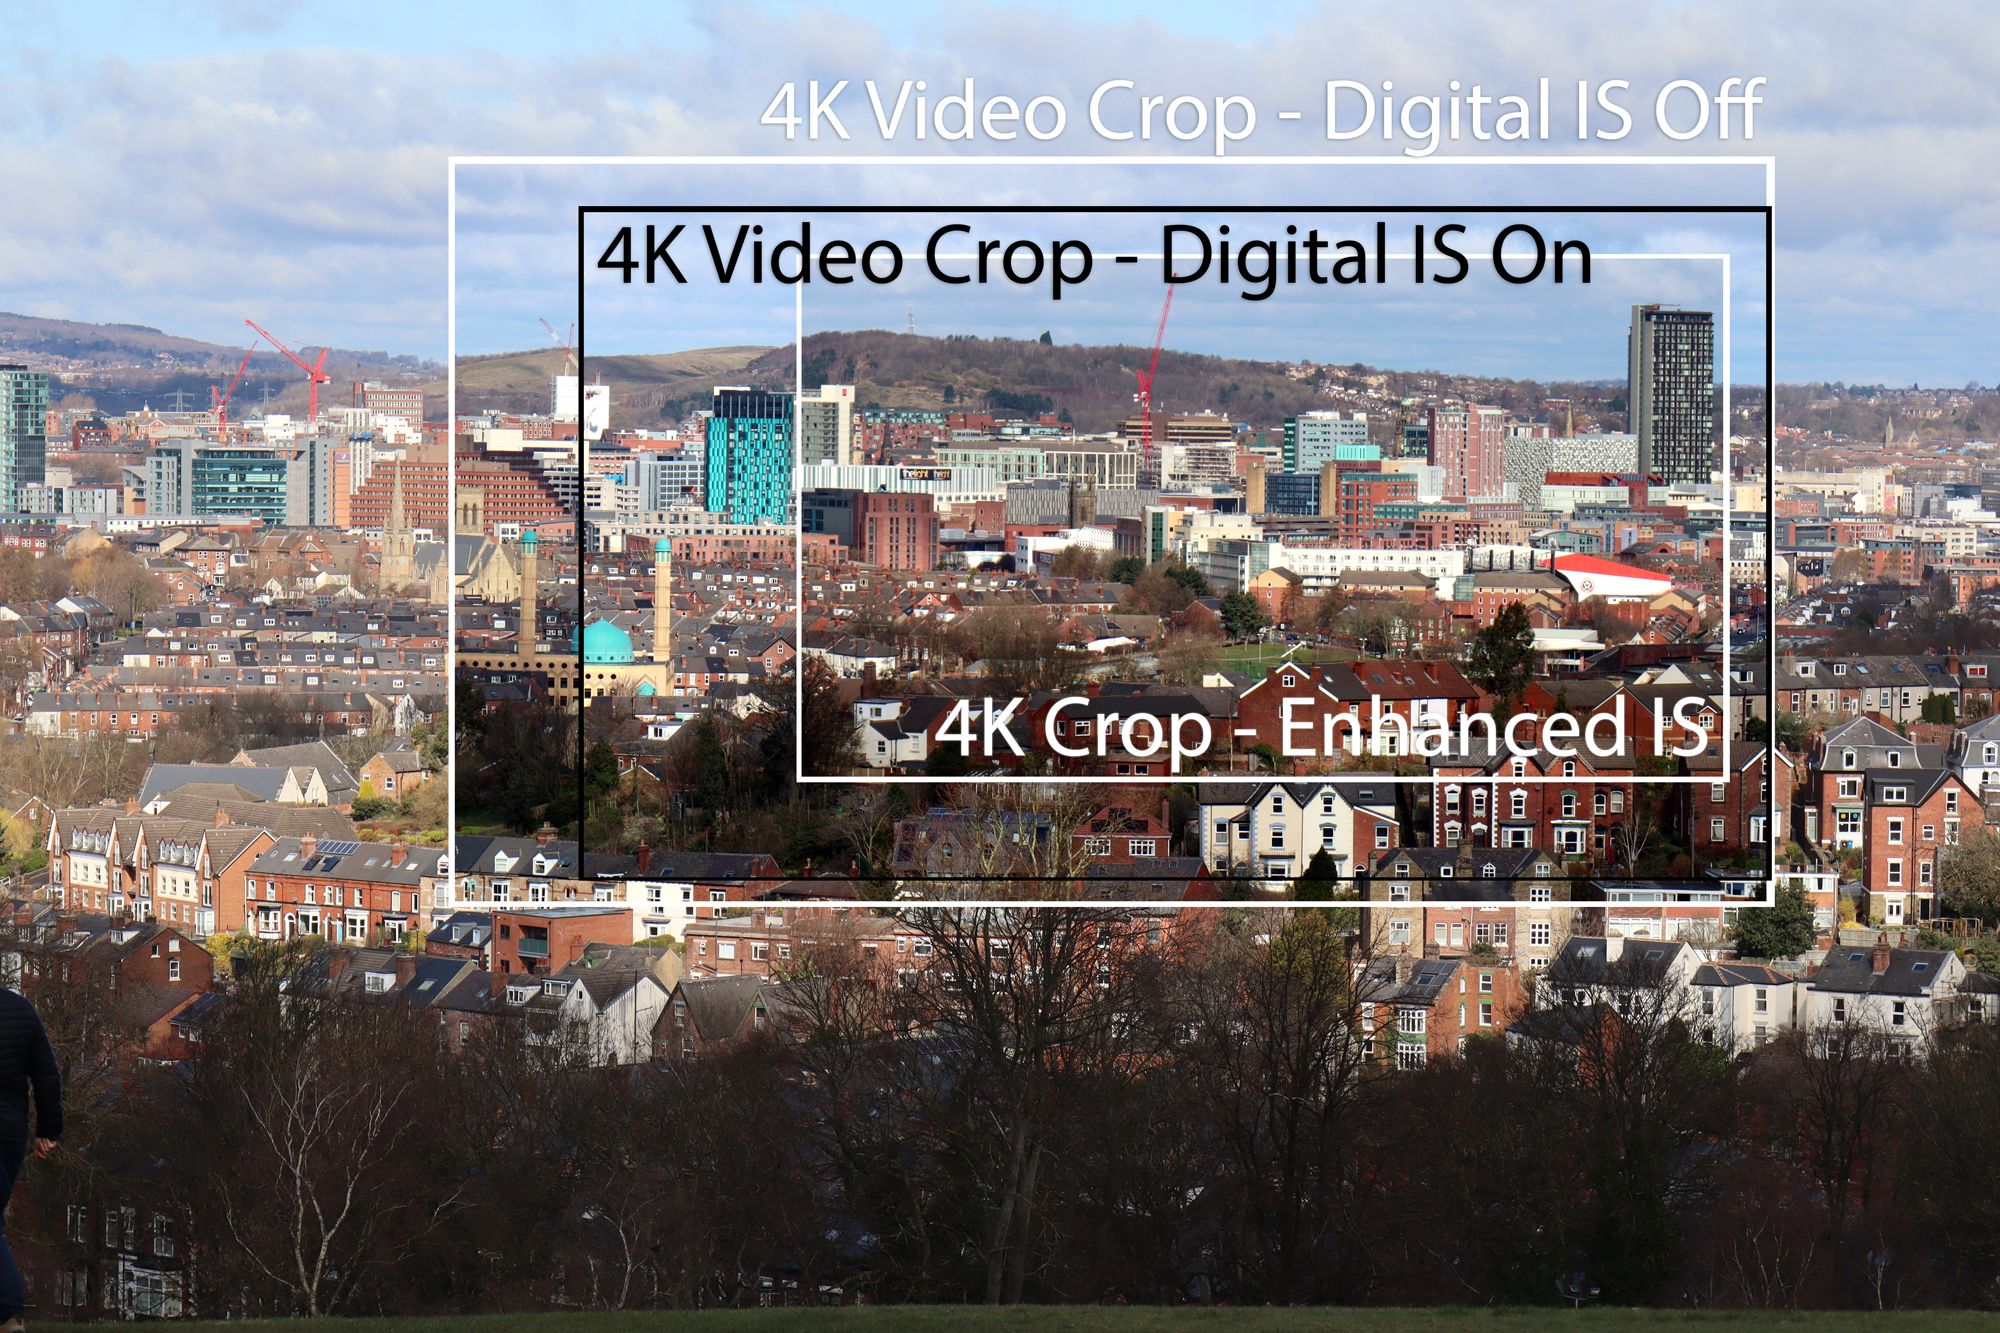 4K Video on the Canon EOS M50